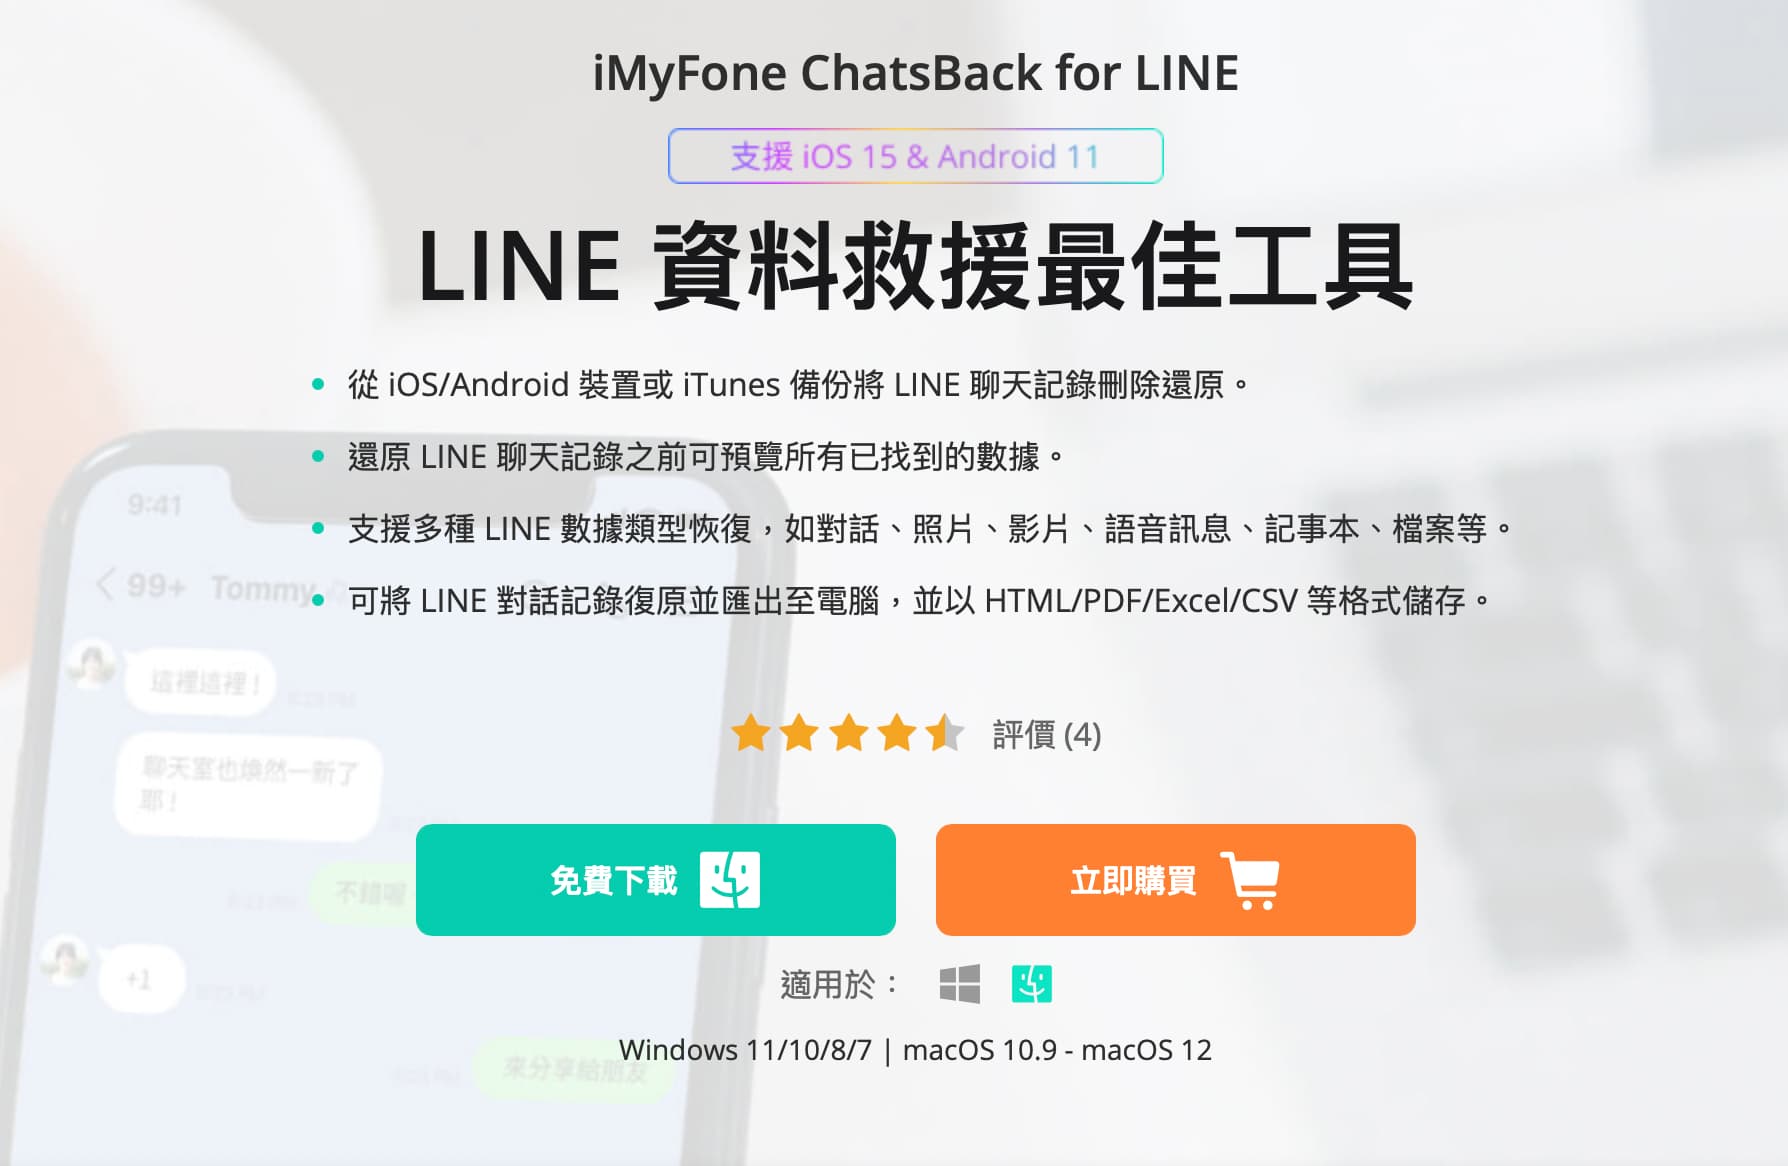 2022 iPhone、Android 手機 LINE 訊息誤刪除怎麼救回？iMyFone ChatsBack for LINE教學實測